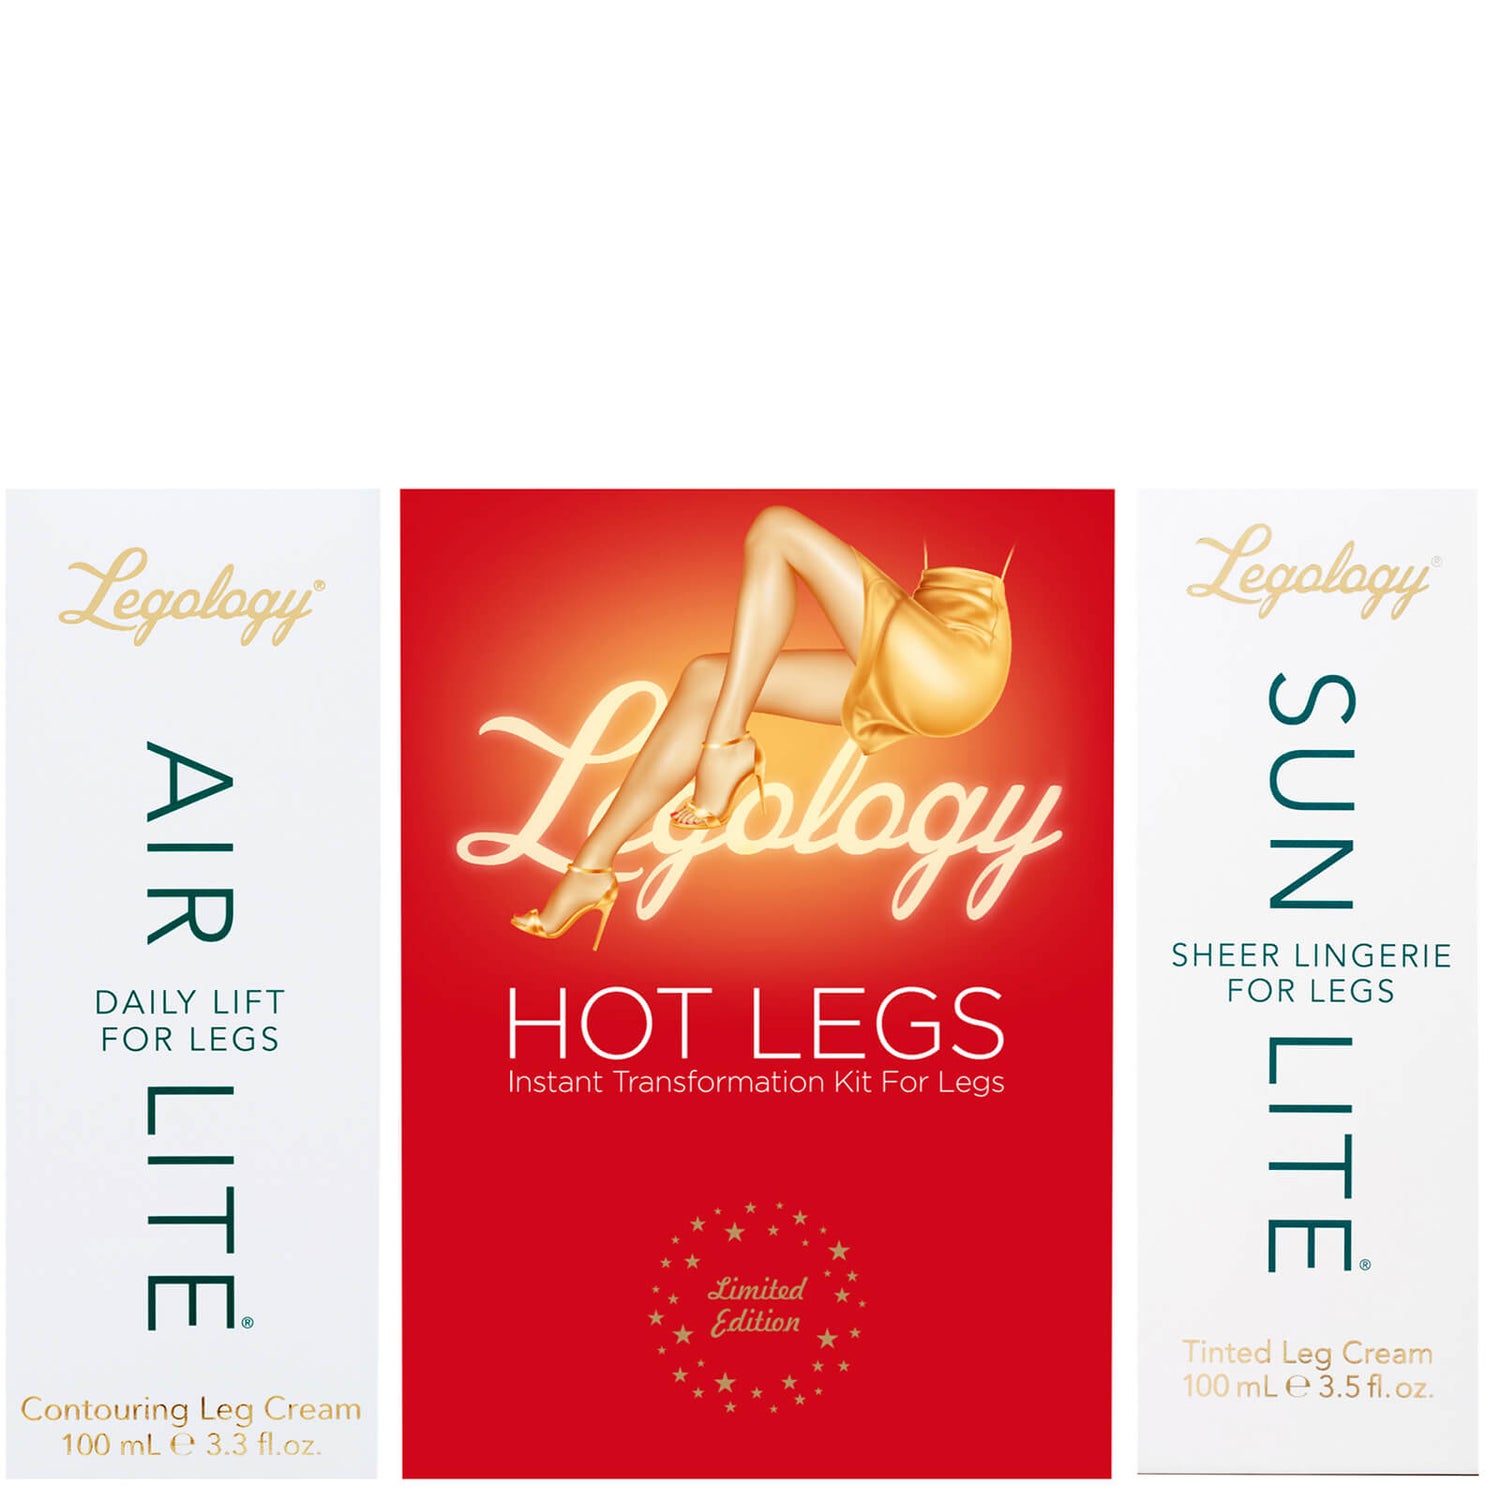 Legology Limited Edition Hot Legs Instant Transformation Kit For Legs